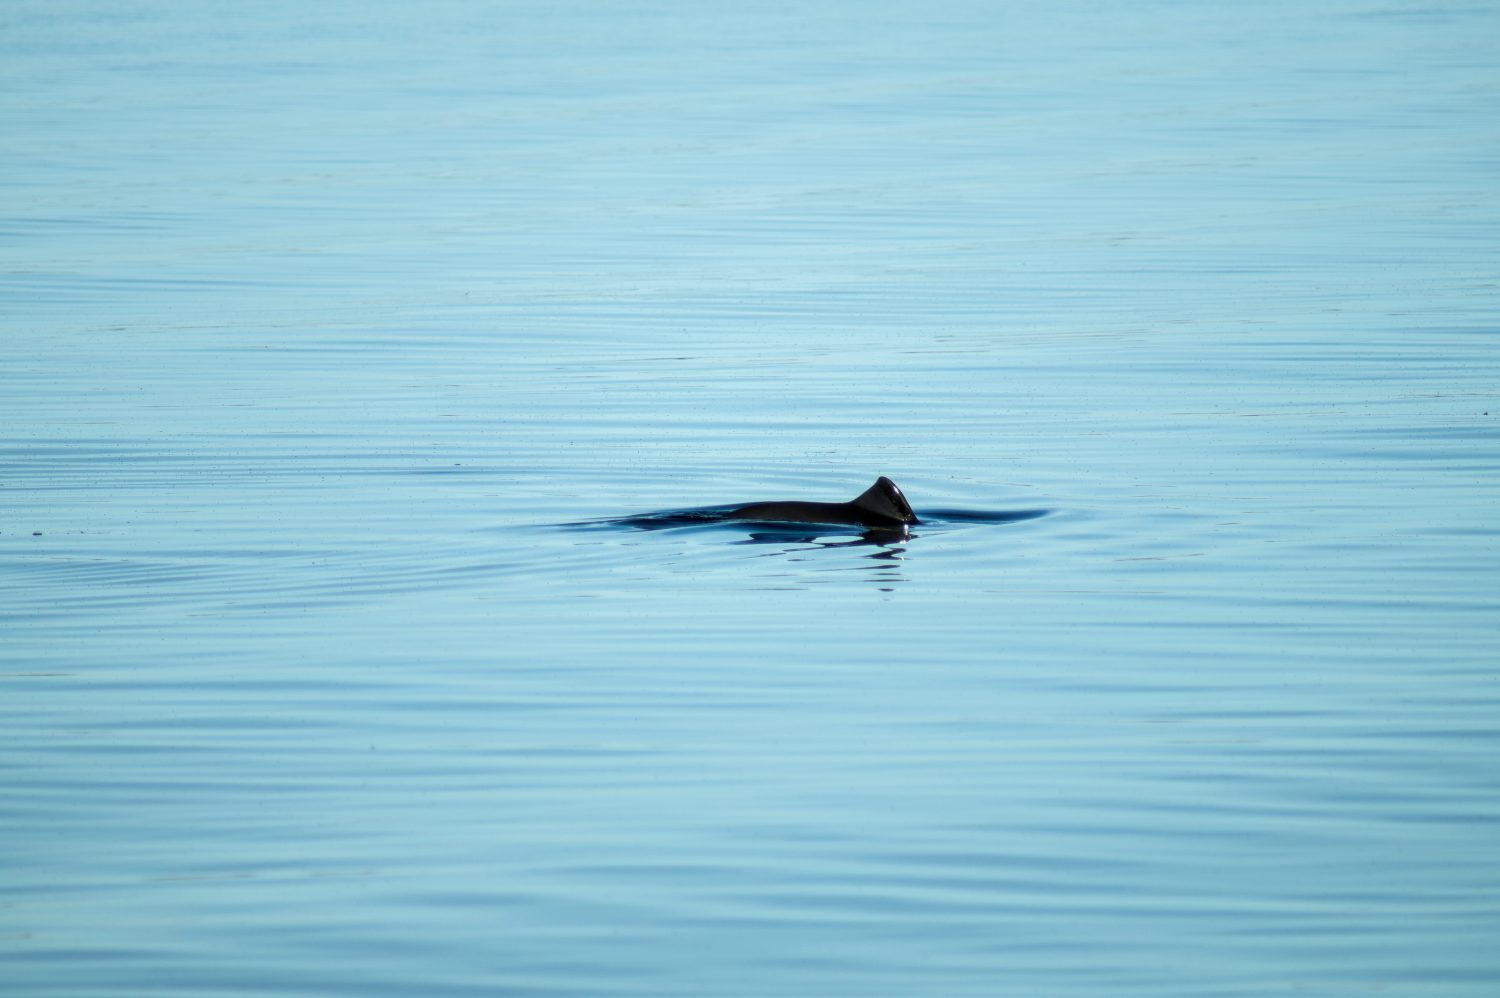 Porpoise fin breaching the water